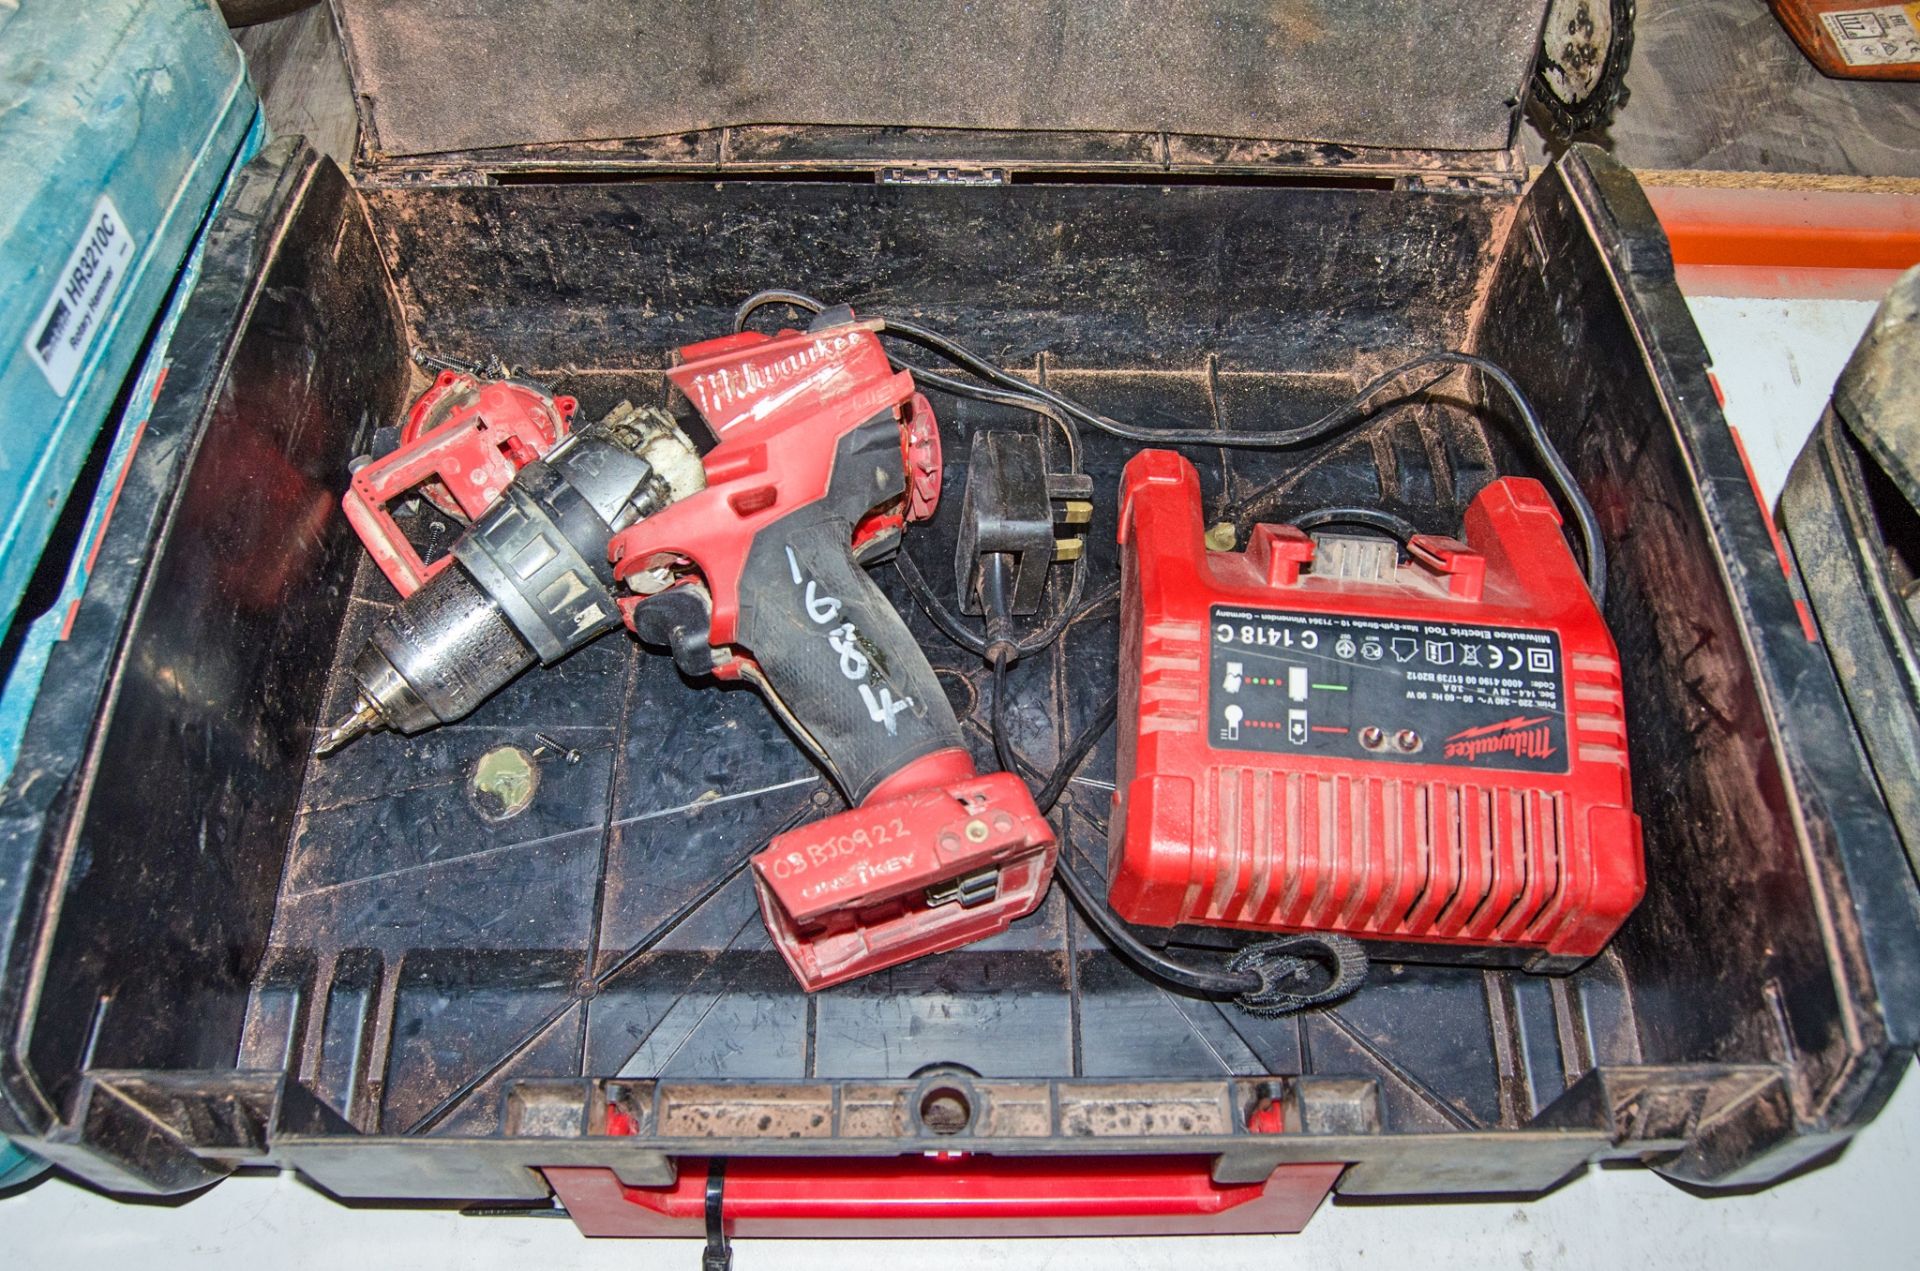 Milwaukee 18v cordless drill for spares c/w charger and carry case